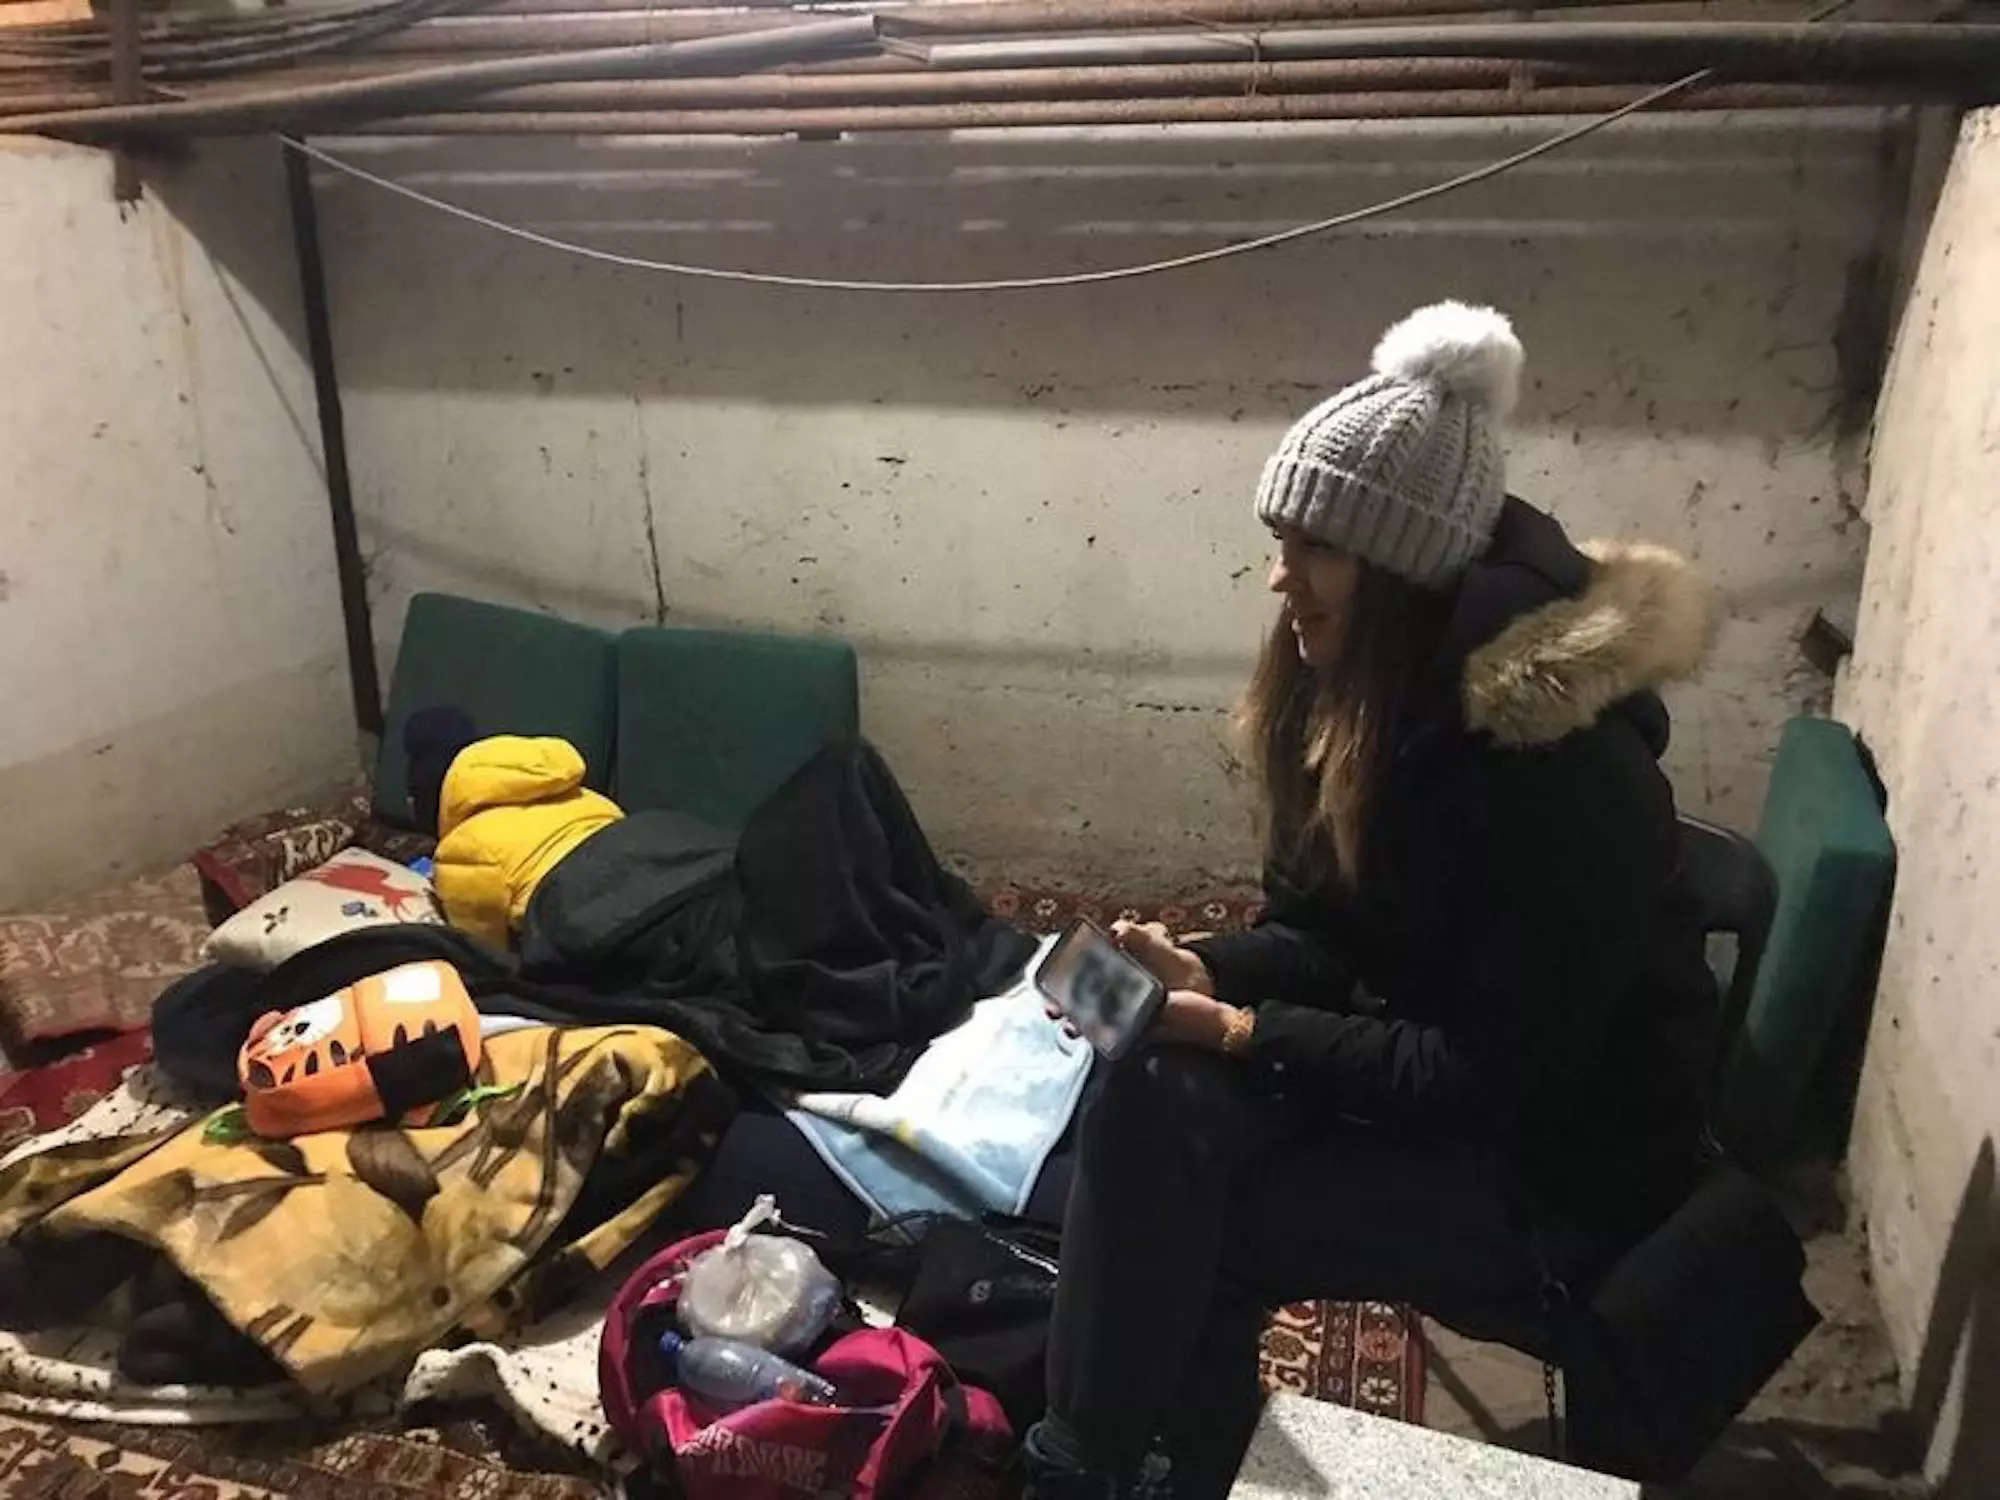 Marina Shut sits in a basement with her coat on with her six-year-old son